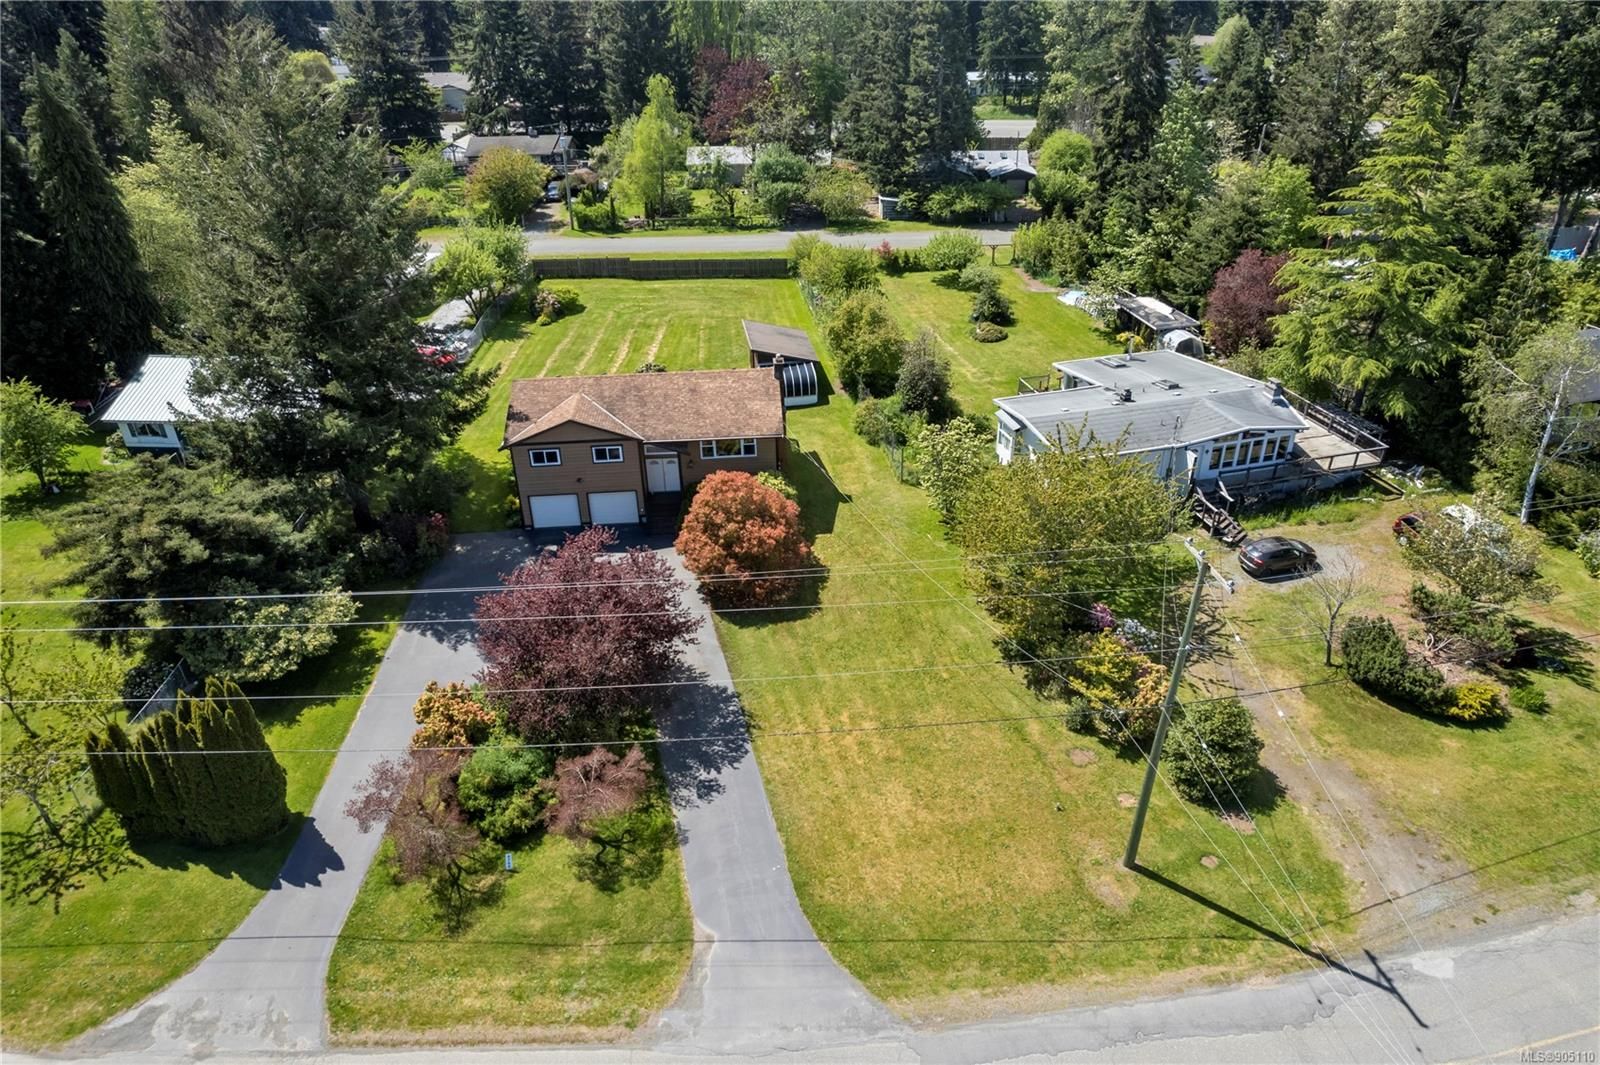 New property listed in CR Campbell River South, Campbell River